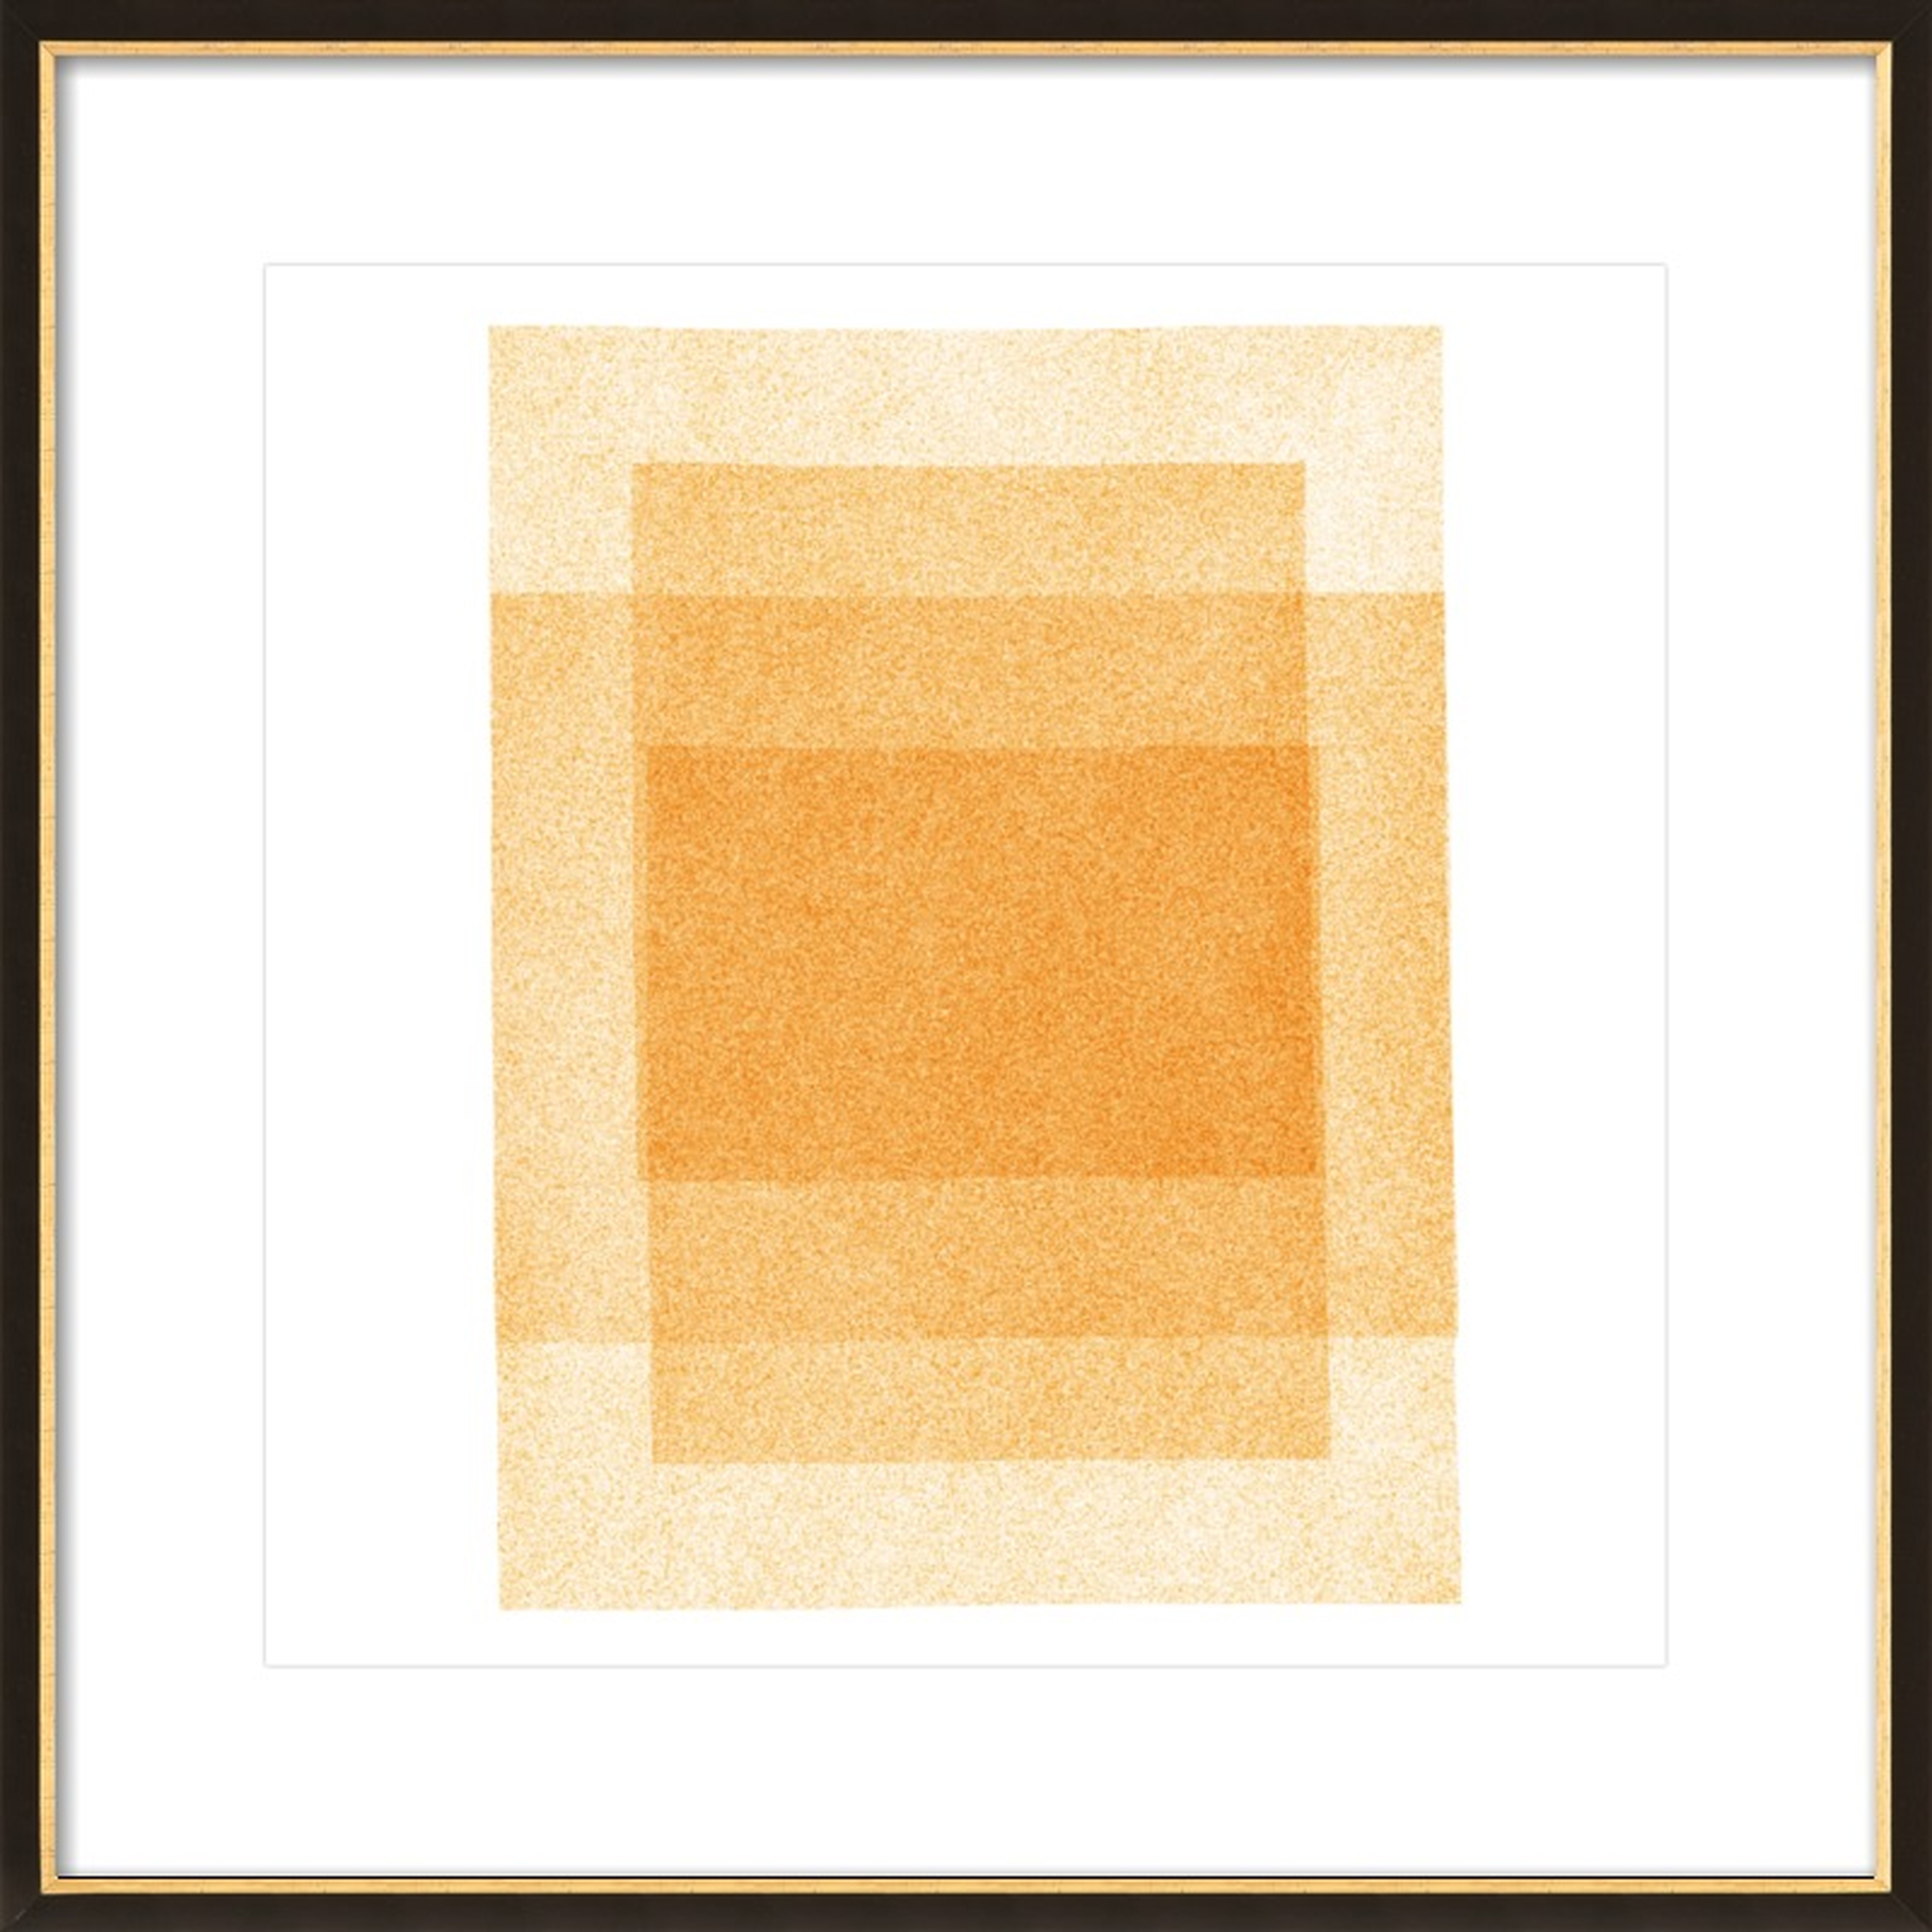 Golden Rectangles in Rectangles: Soft Geometry by Jessica Poundstone for Artfully Walls - Artfully Walls